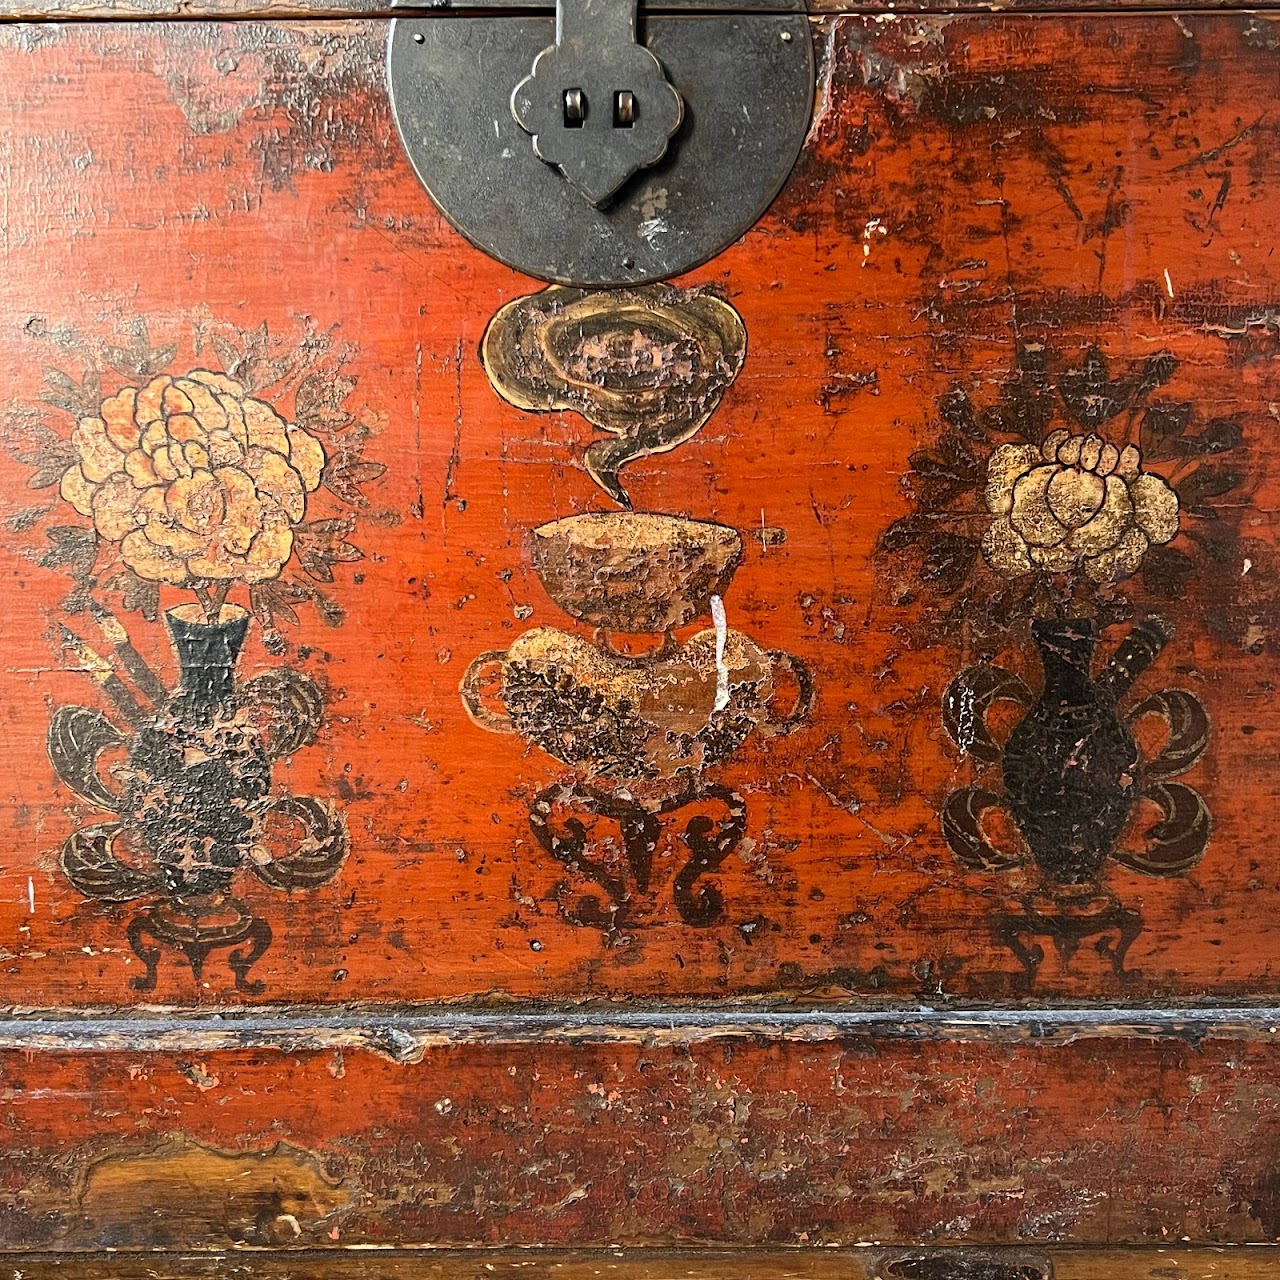 Chinese Lacquered Trunk